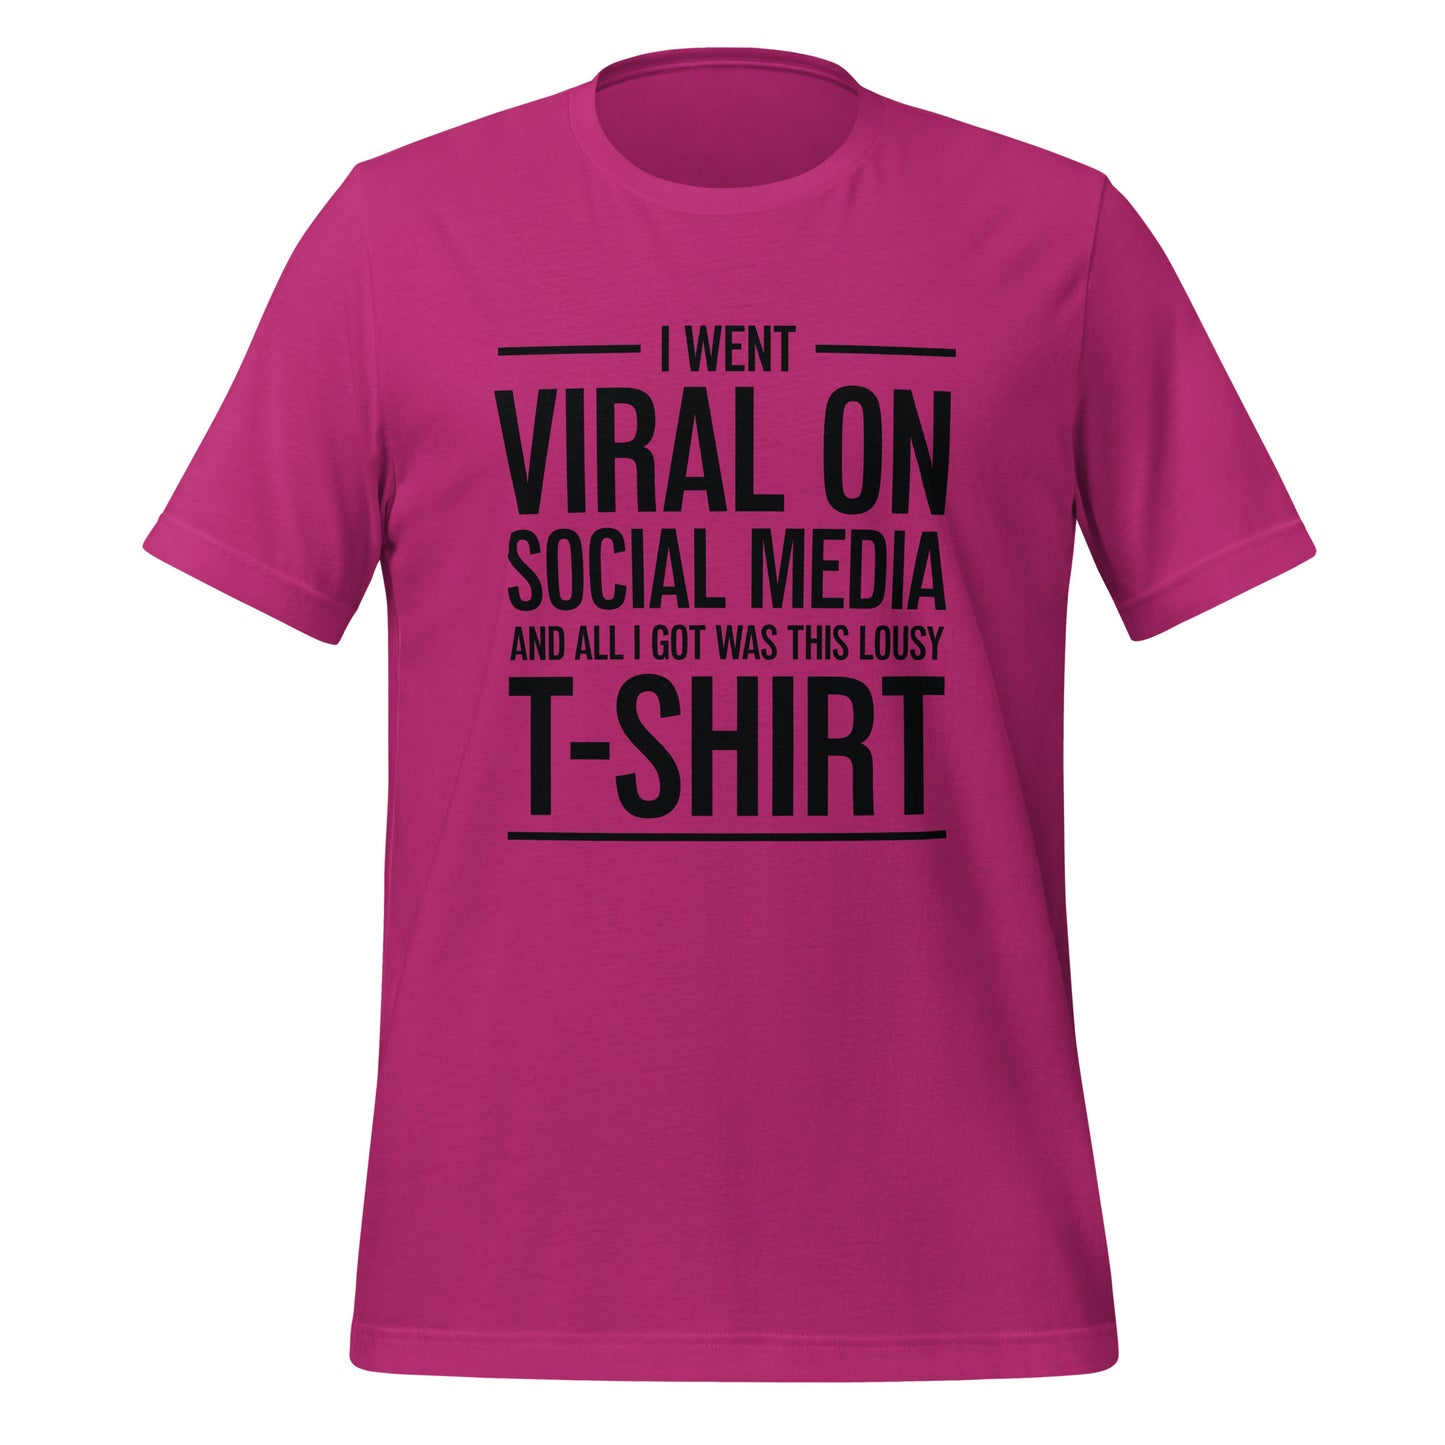 A shirt that reads, "I went viral on social media and all I got was this lousy t-shirt." 